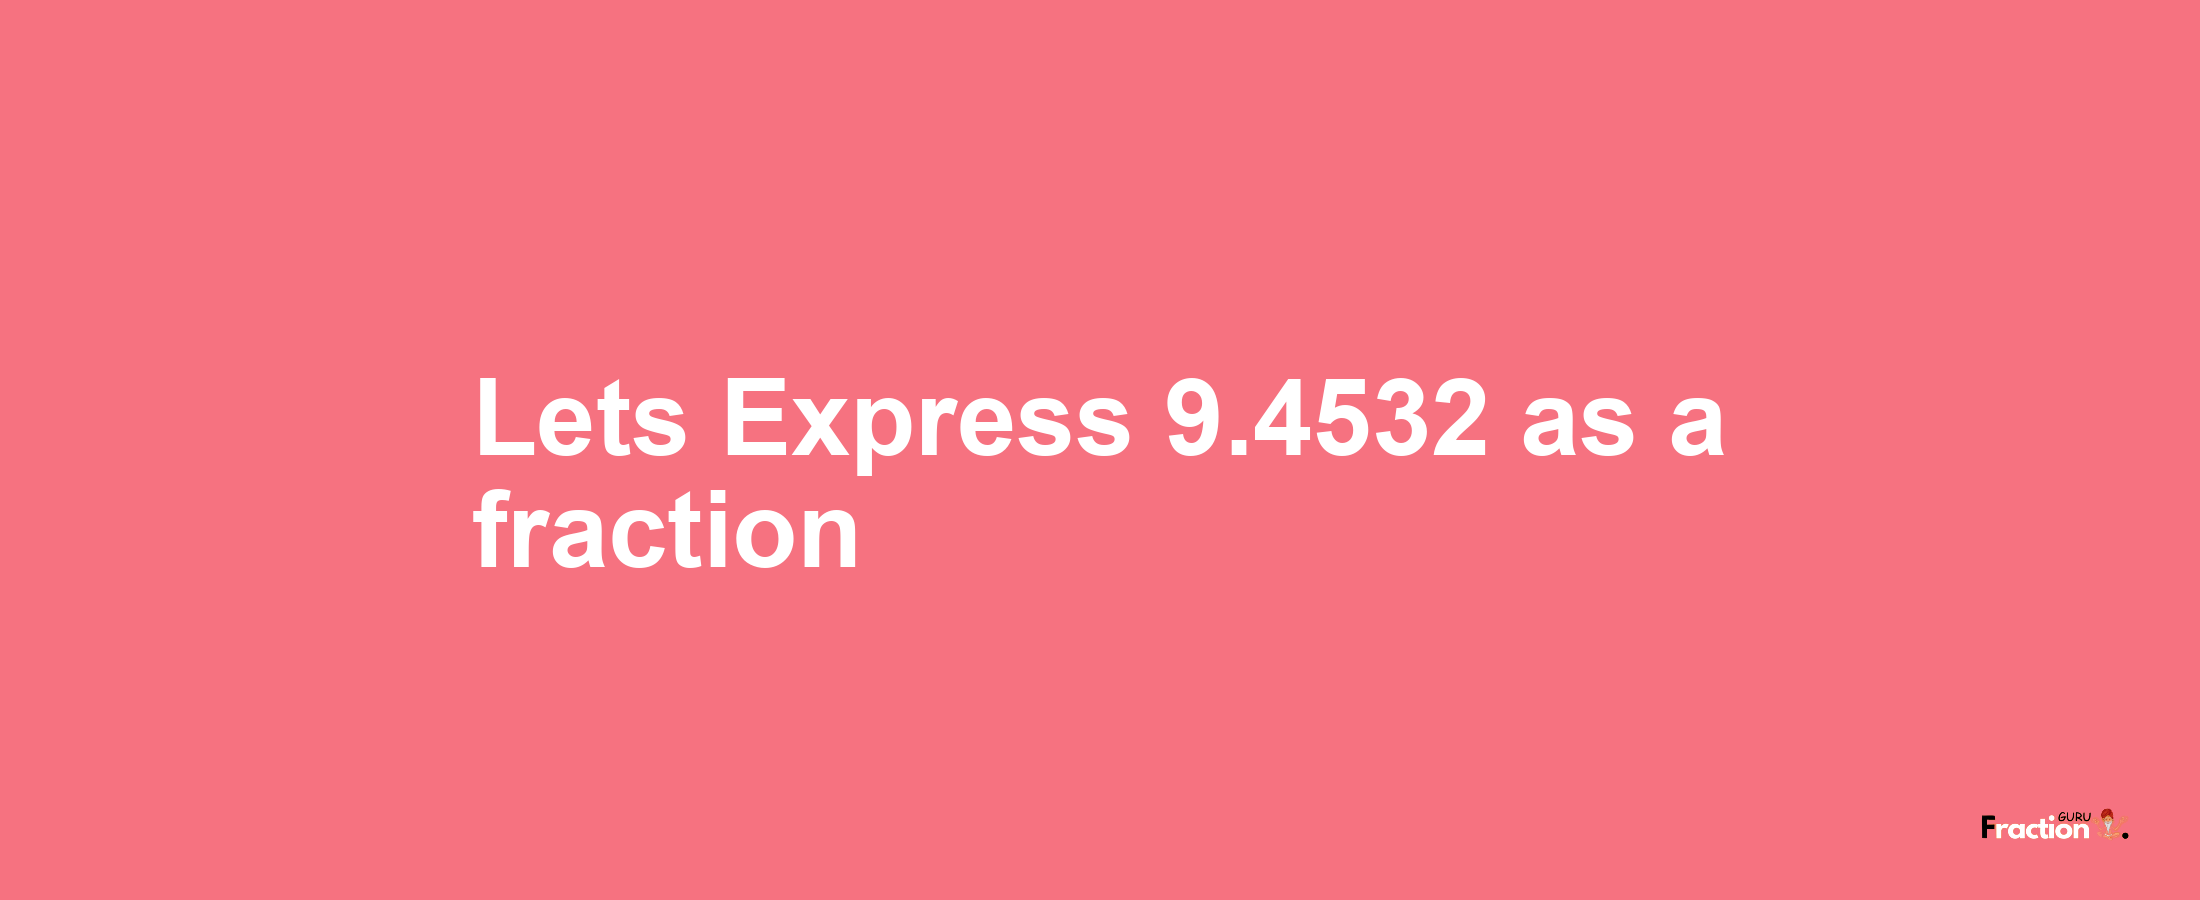 Lets Express 9.4532 as afraction